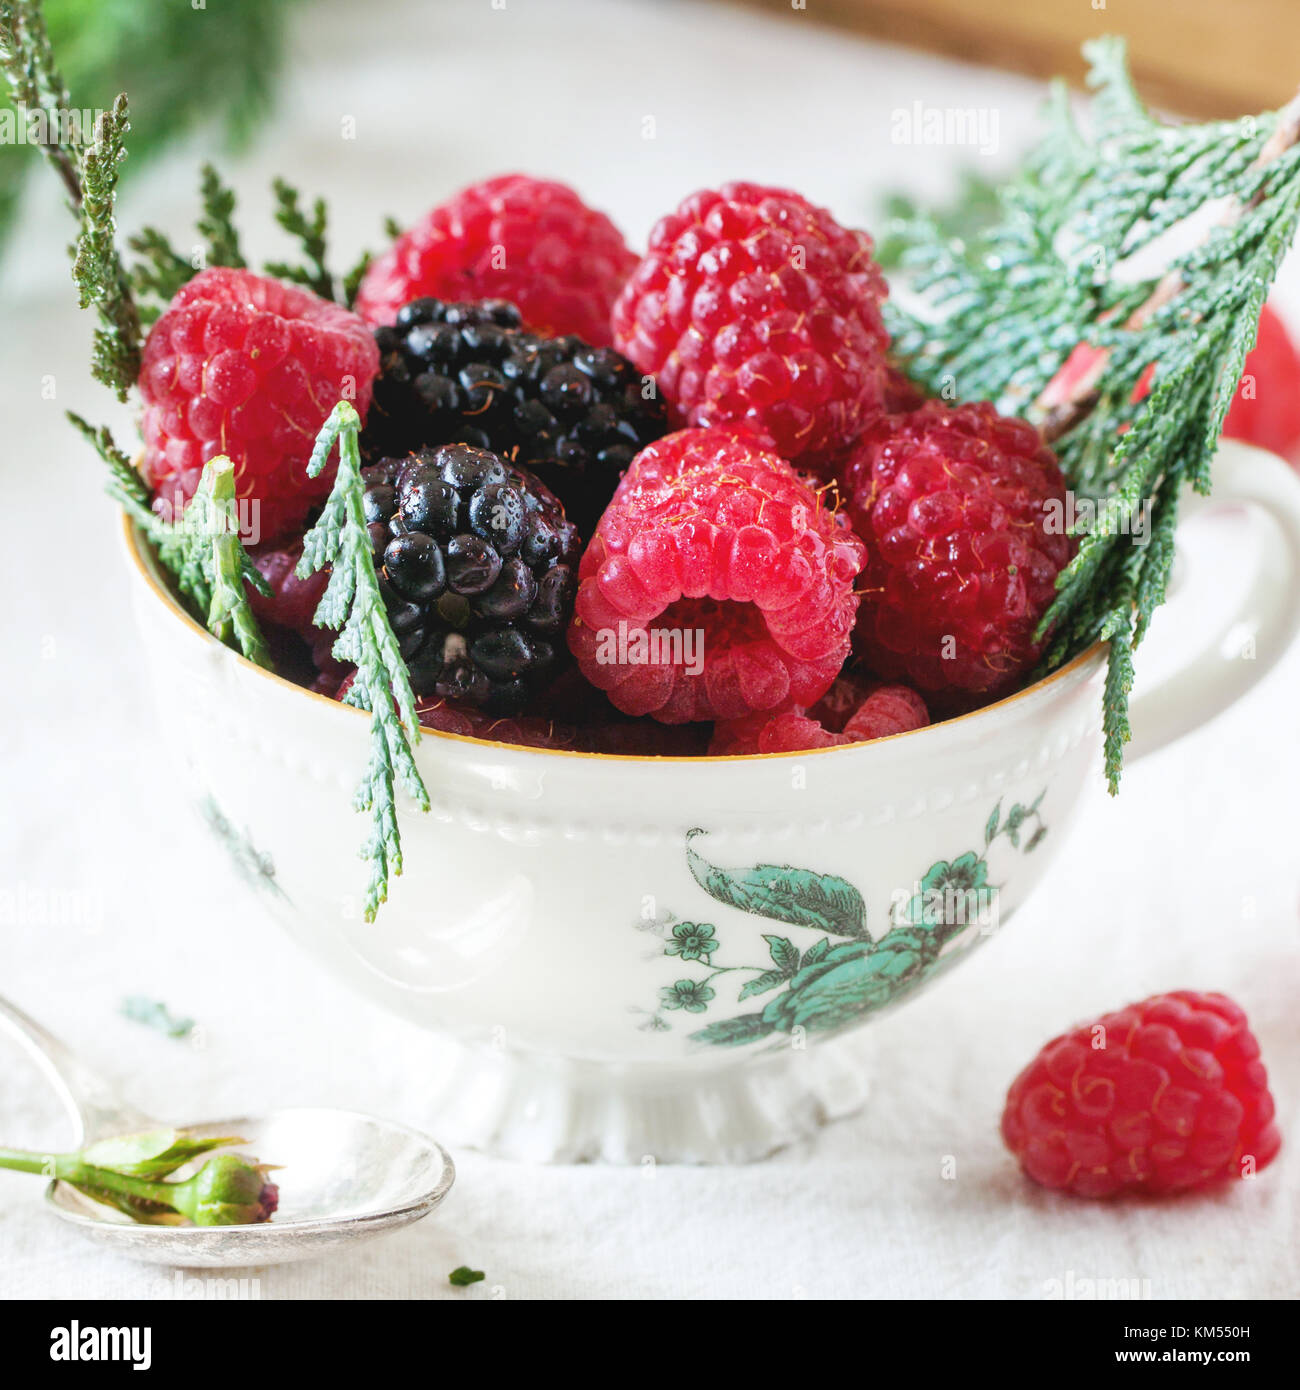 Vintage cup of raspberries and blackberries served with thuja branches and old book on the table. Square image with selective focus Stock Photo